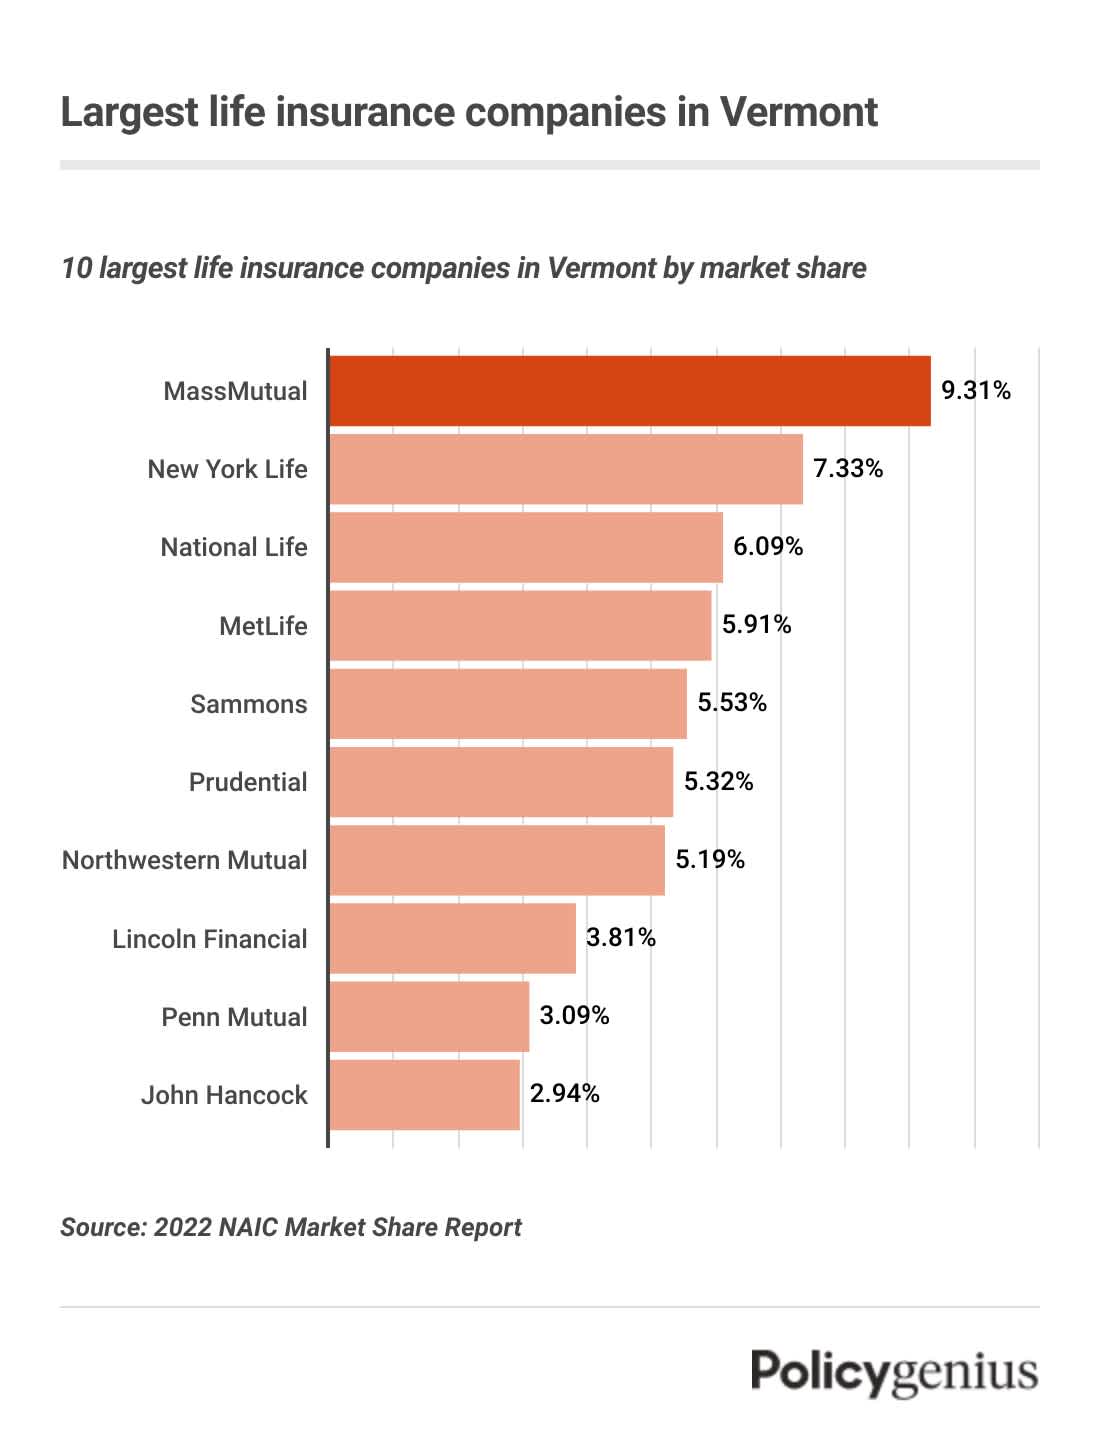 A bar graph showing the largest life insurance companies in Vermont. MassMutual has the largest market share.